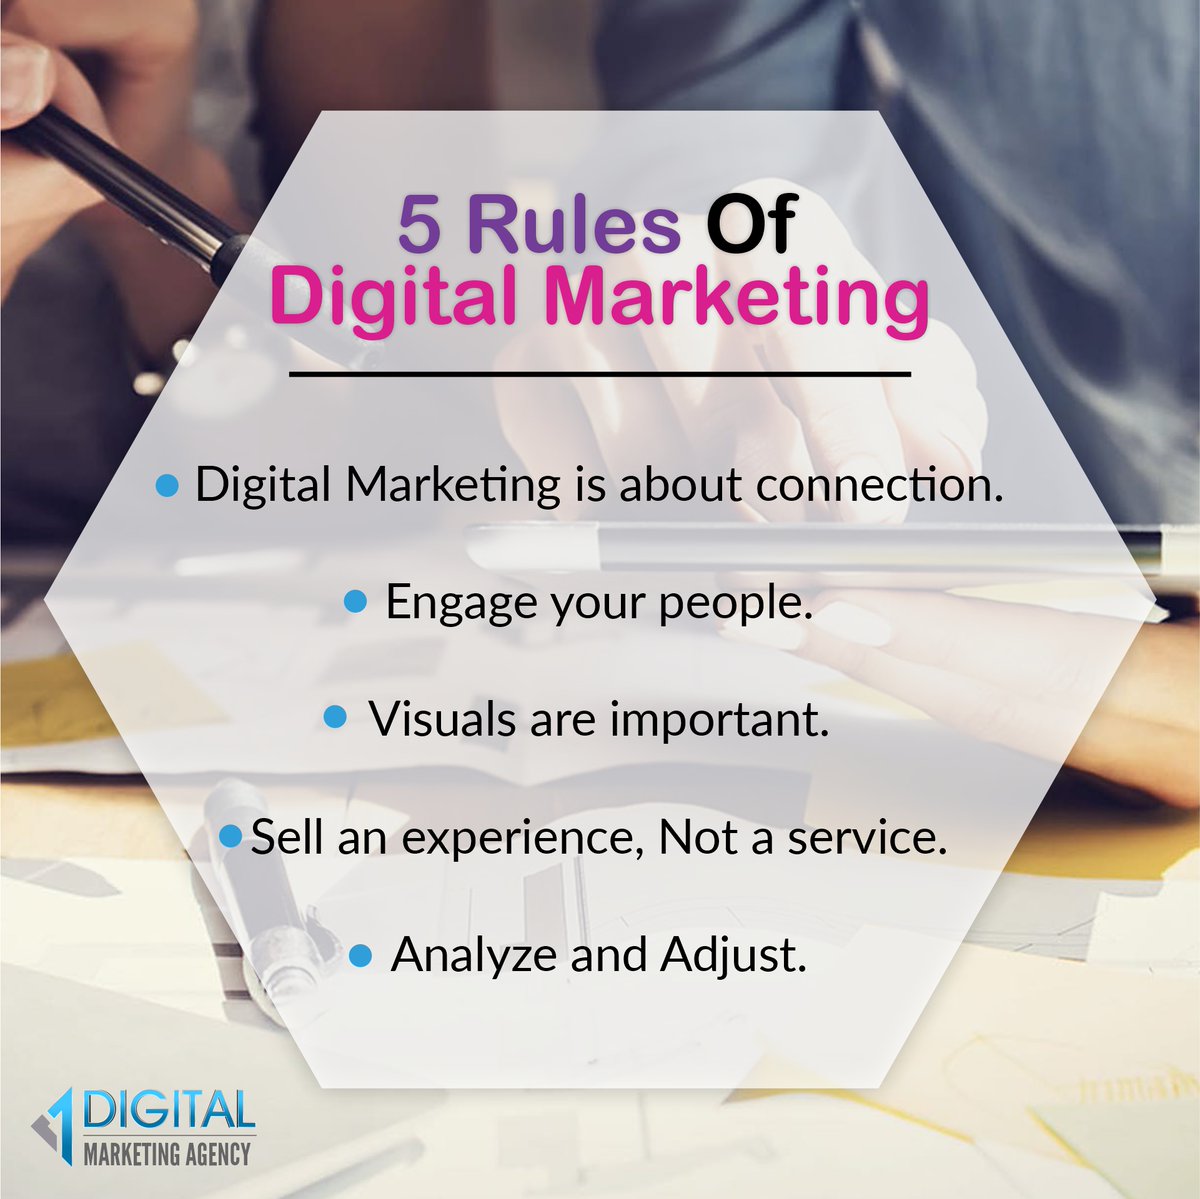 5 Rules to Help You Crush the Competition.
.
.
#dmao #digialmarketingagency #digitalmarketingagencyonline #digitalmarketing #rulesofdigitalmarketing #website #digitalmarketingtips #digitalmarketingtools #digitalmarketingstrategies #digitalmarketingexperts #digitalmarketingservice